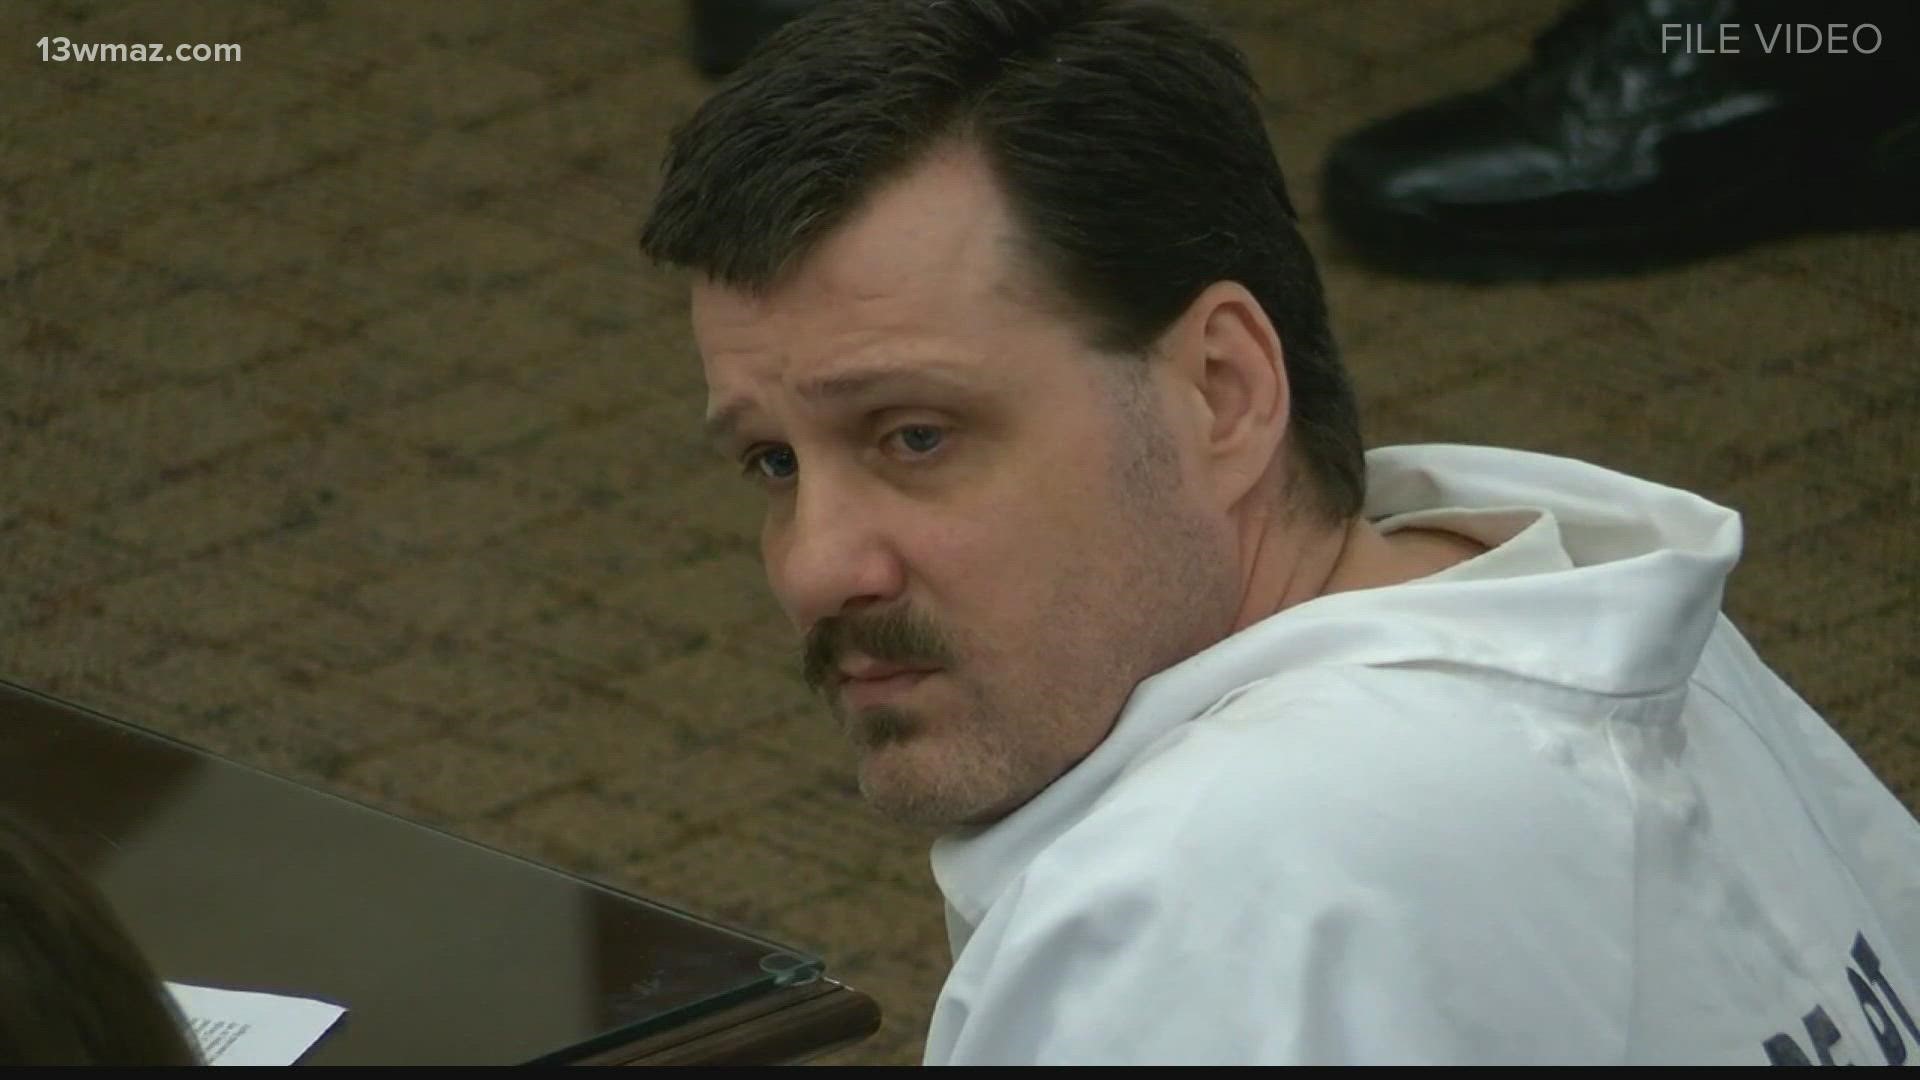 Monday was the first day of jury selection in Donnie Rowe's case. He's one of two men facing murder charges in the deaths of two corrections officers